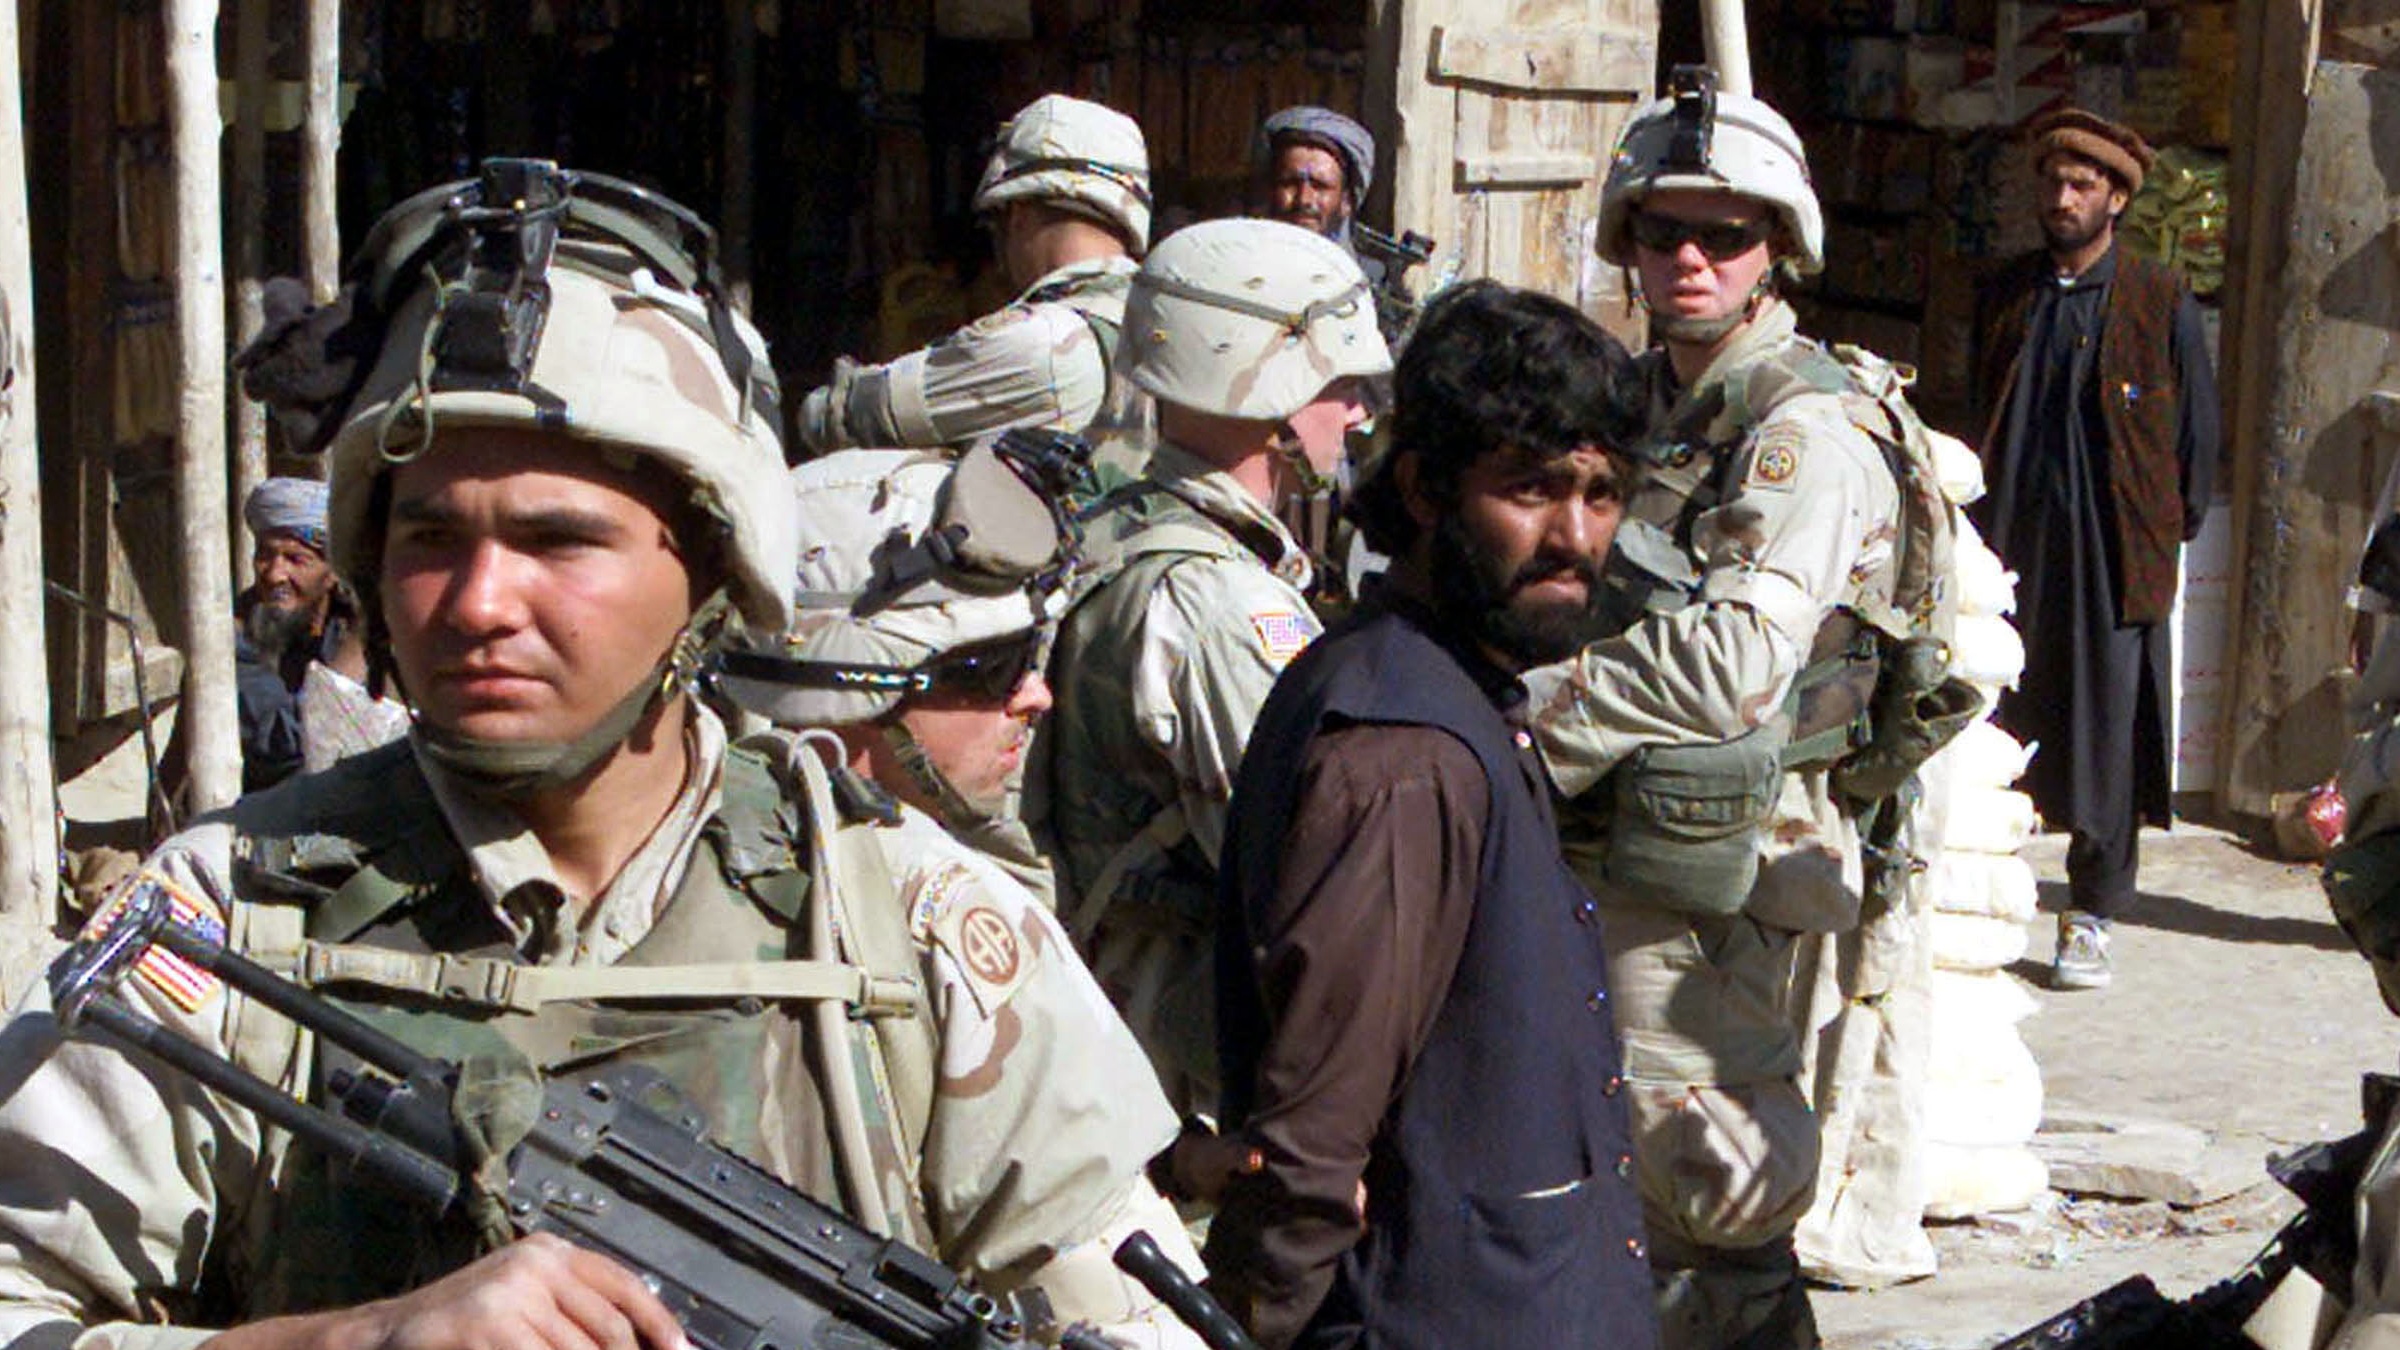 US troops of the 82nd Airborne Division question Afghan men in Kabul, Afghanistan